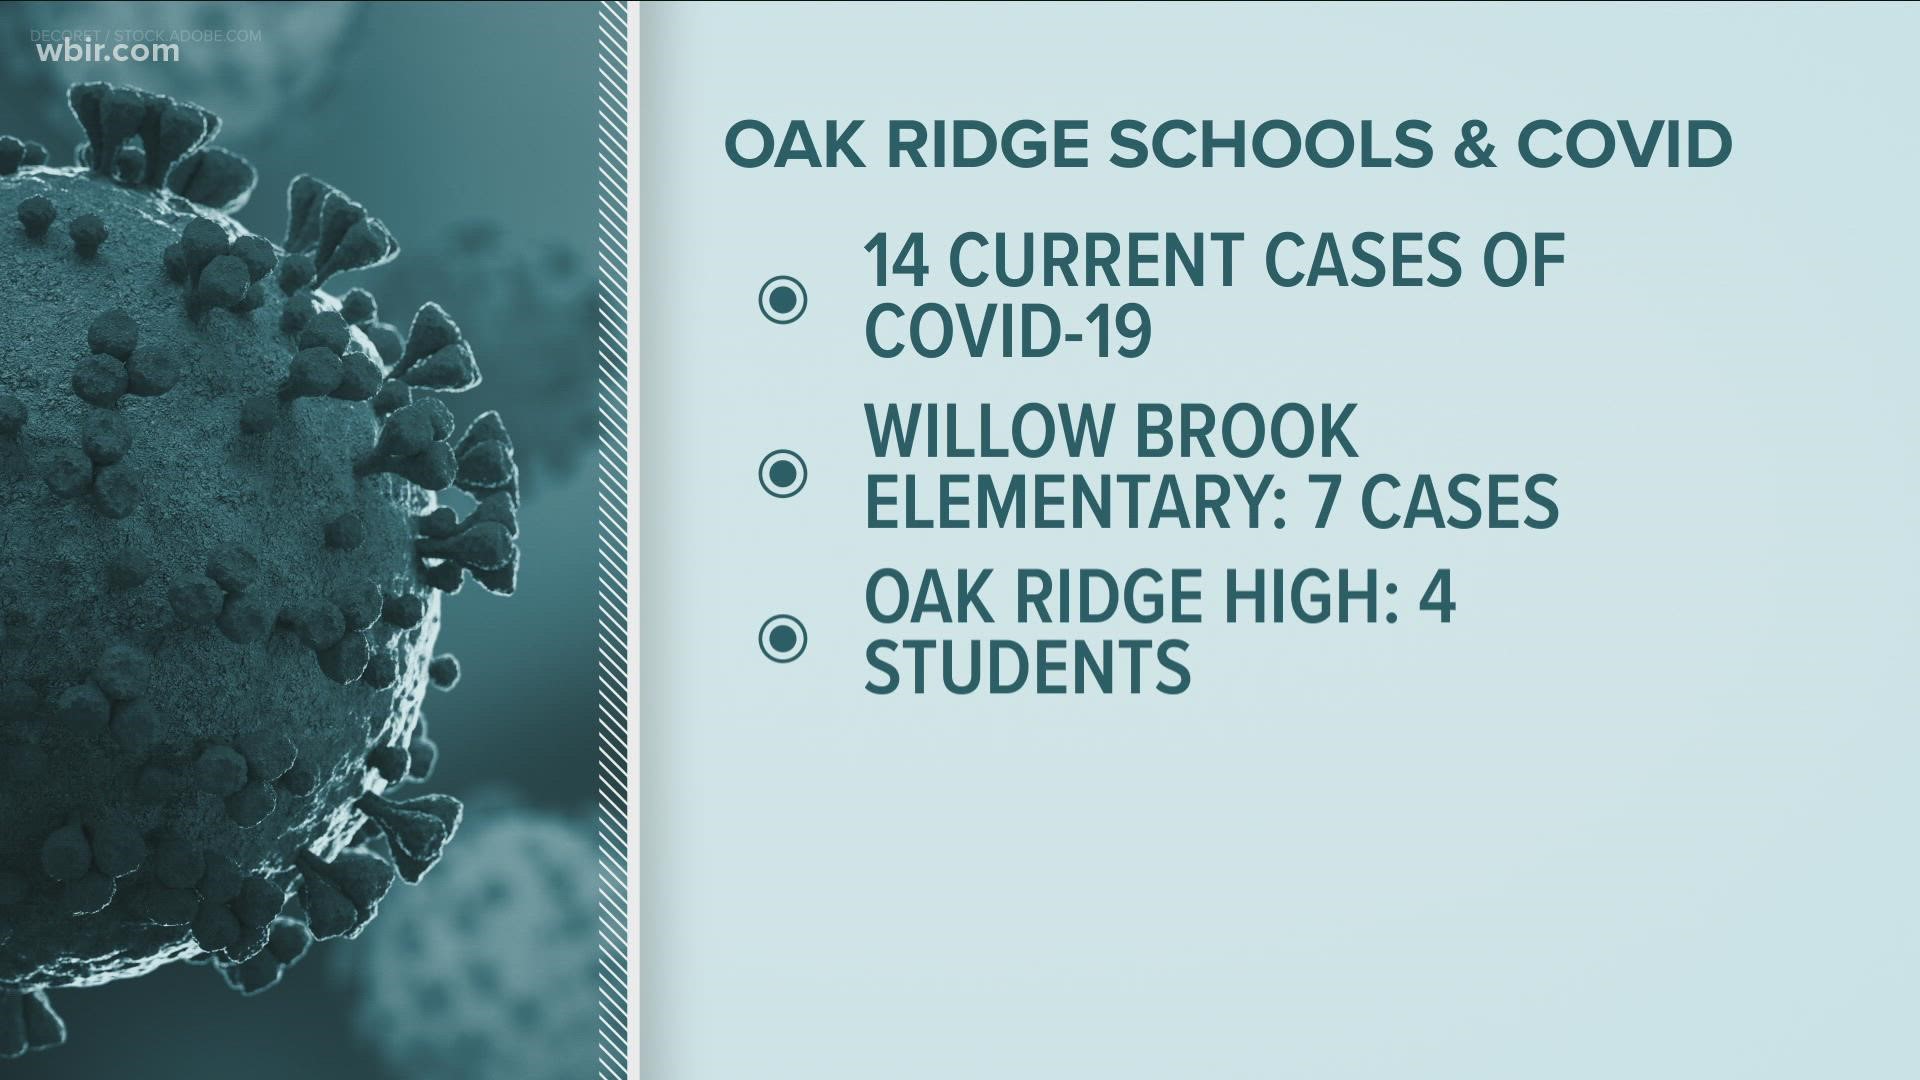 Oak Ridge Schools is now reporting 14 current cases of COVID-19 among students and staff across its district.